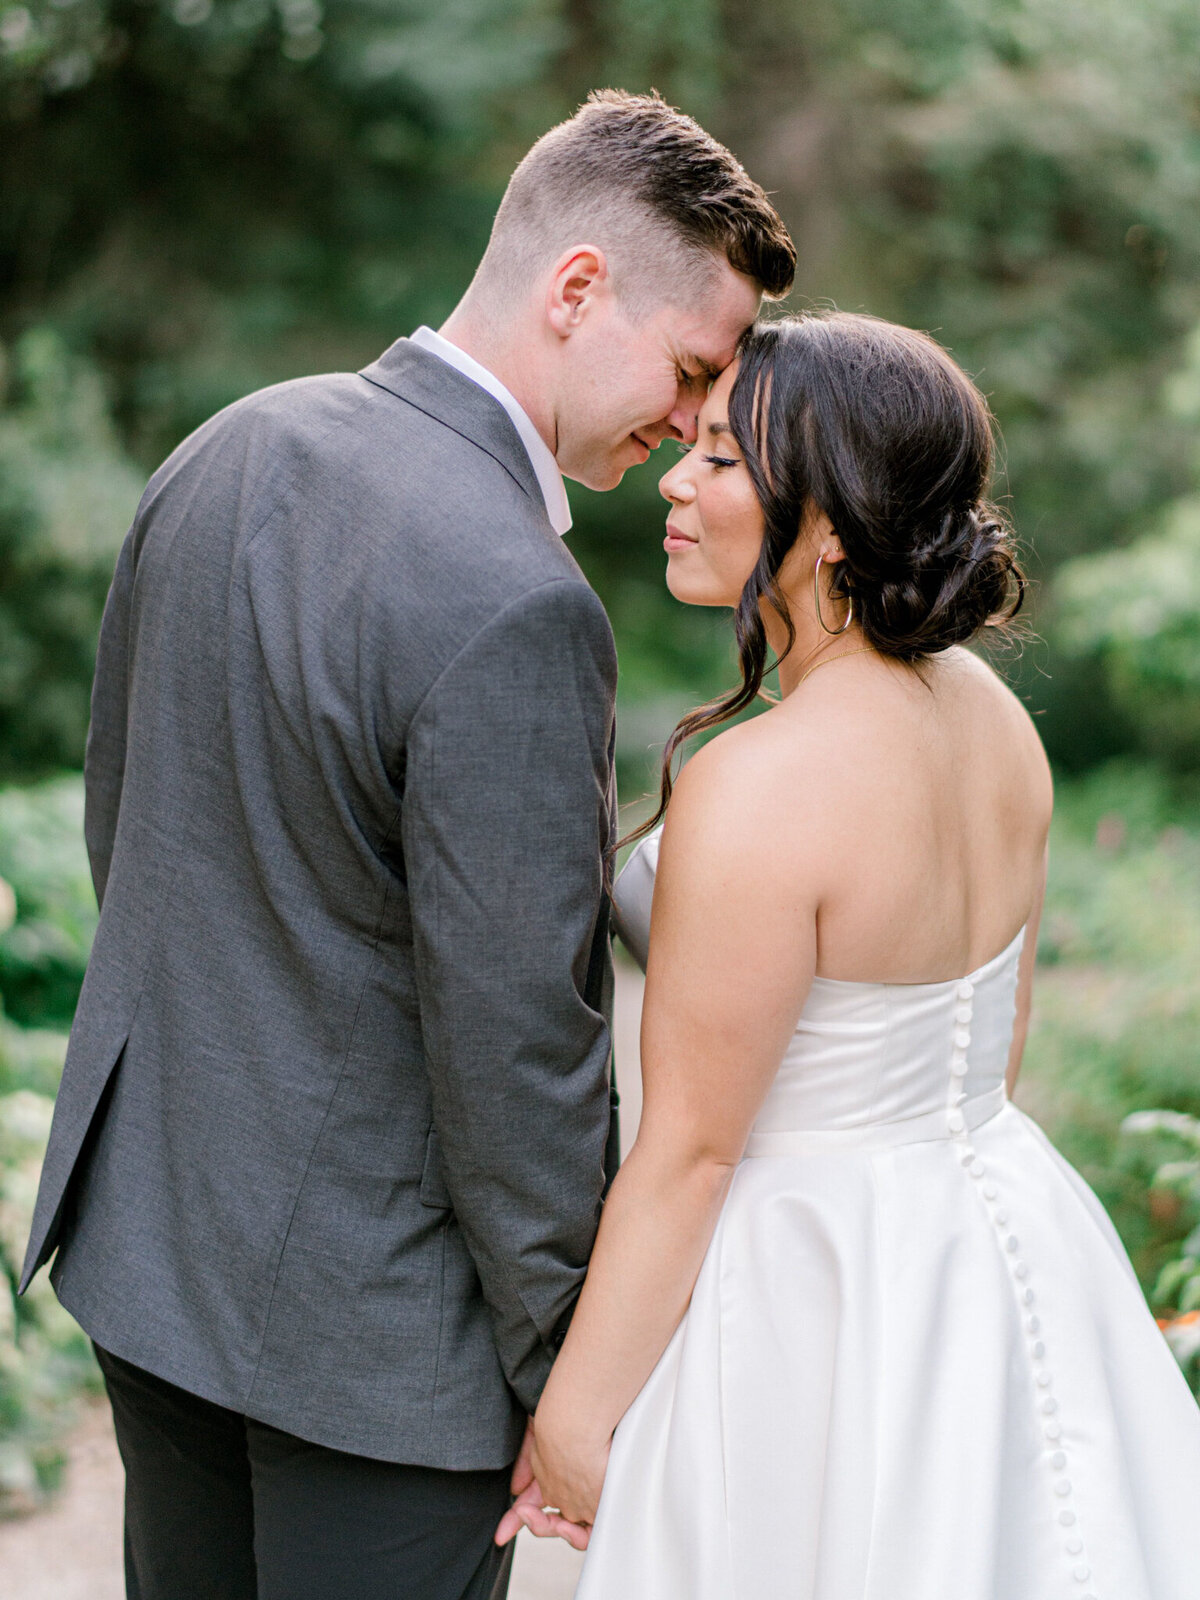 Romantic bridal inspiration, captured by Julie Jagt Photography, fine art wedding photographer in Vancouver, BC. Featured on the Bronte Bride Vendor Guide.